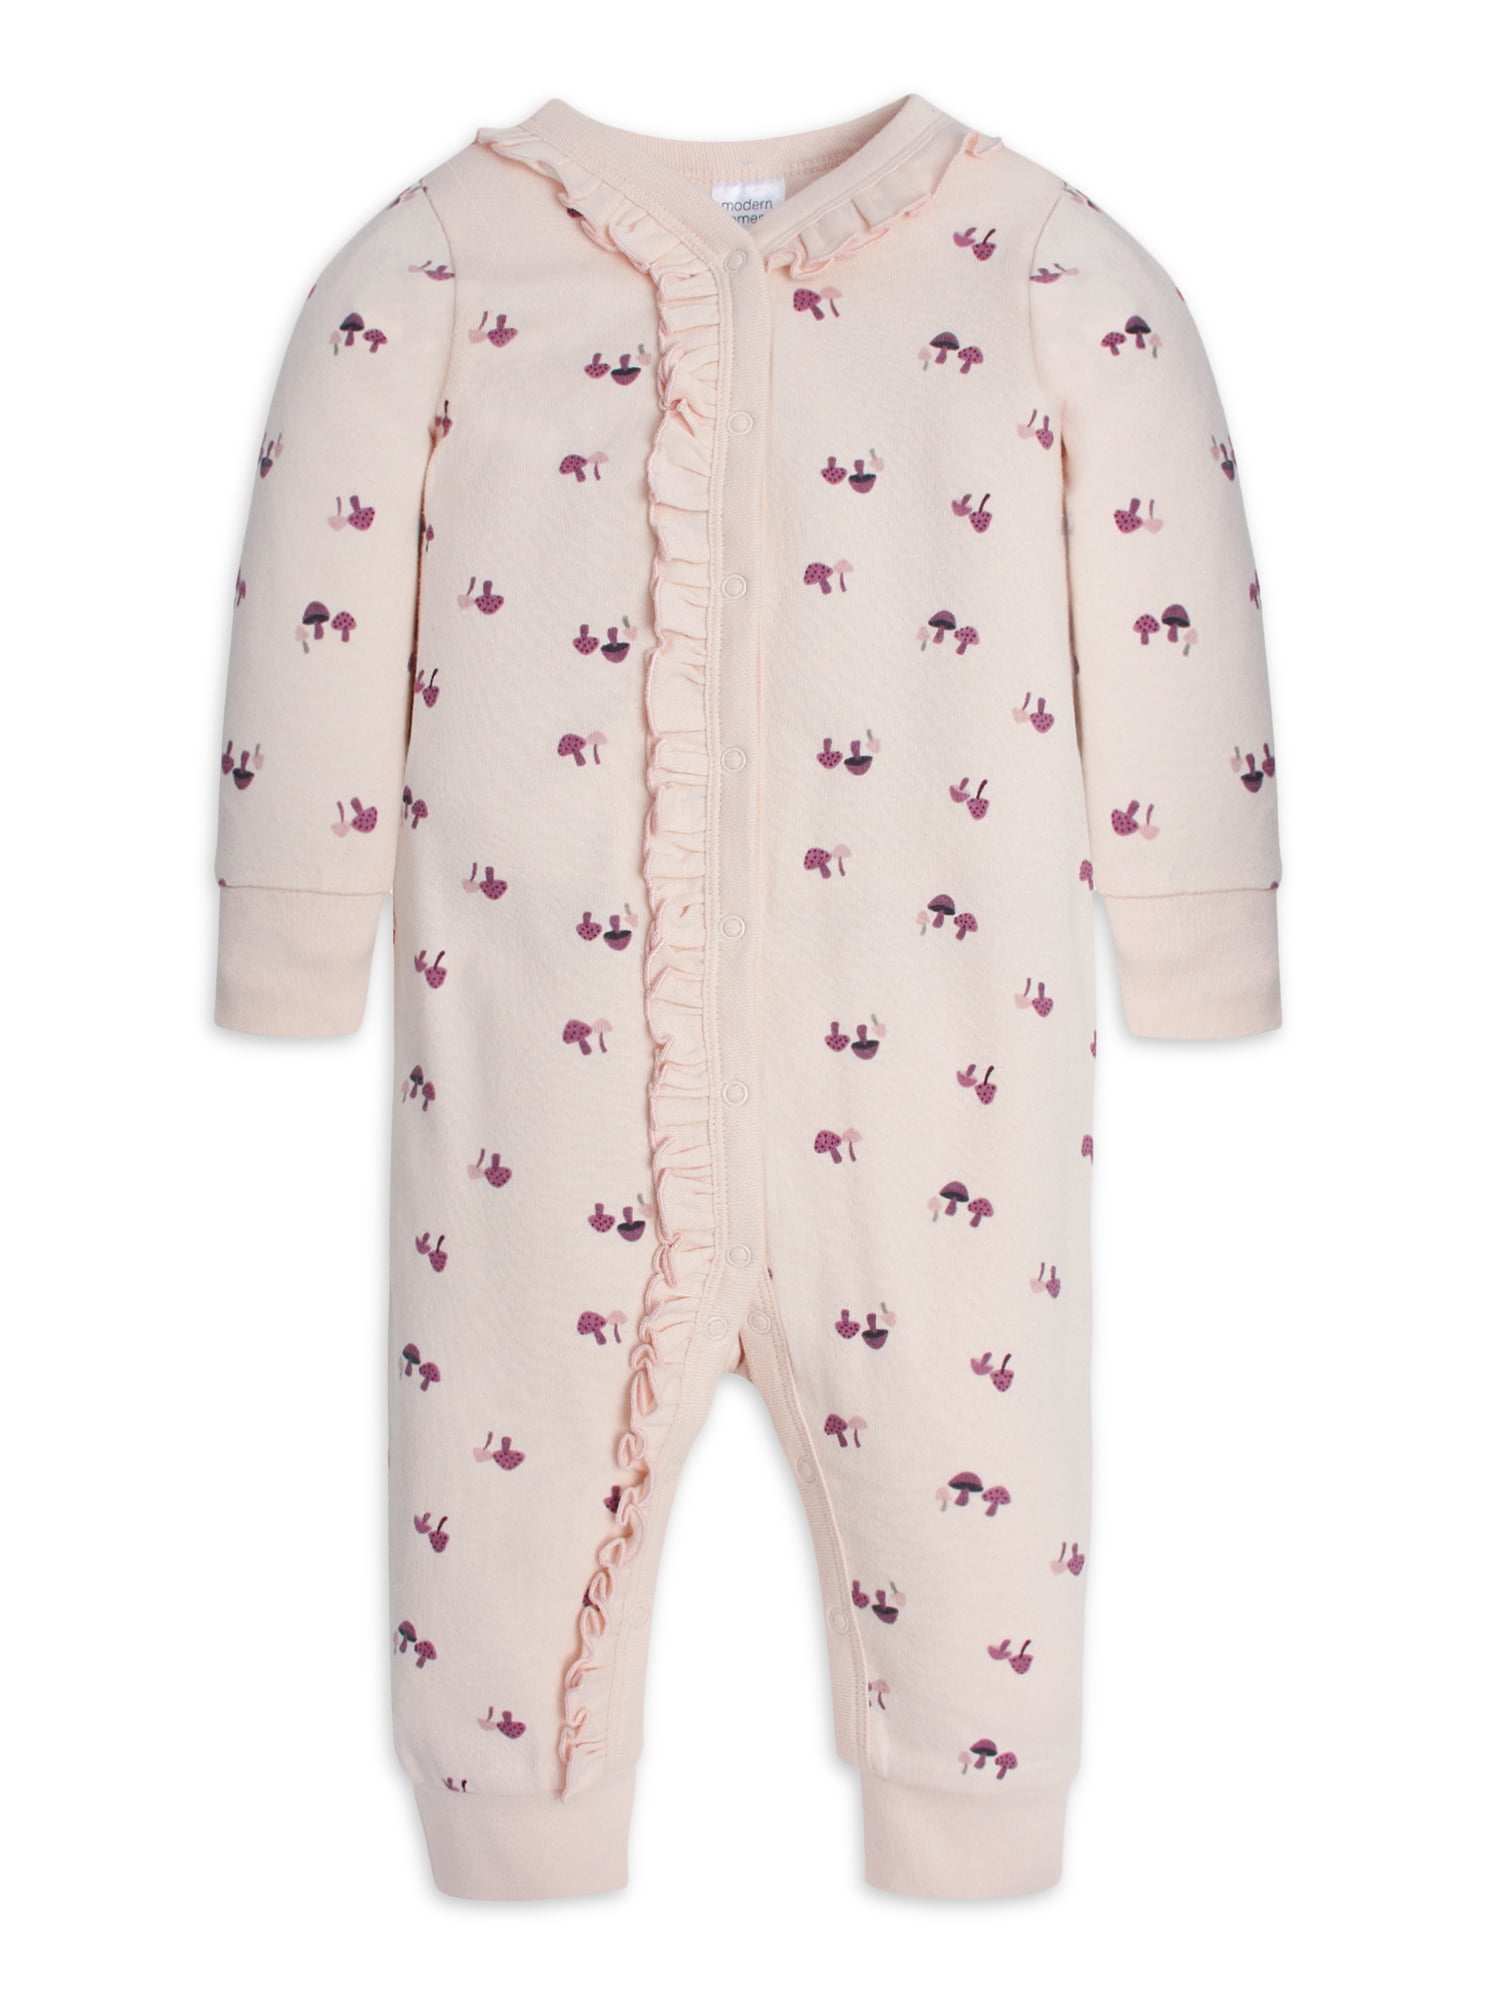 Modern Moments by Gerber Baby Girl Coverall (3/6 Months - 12 Months)